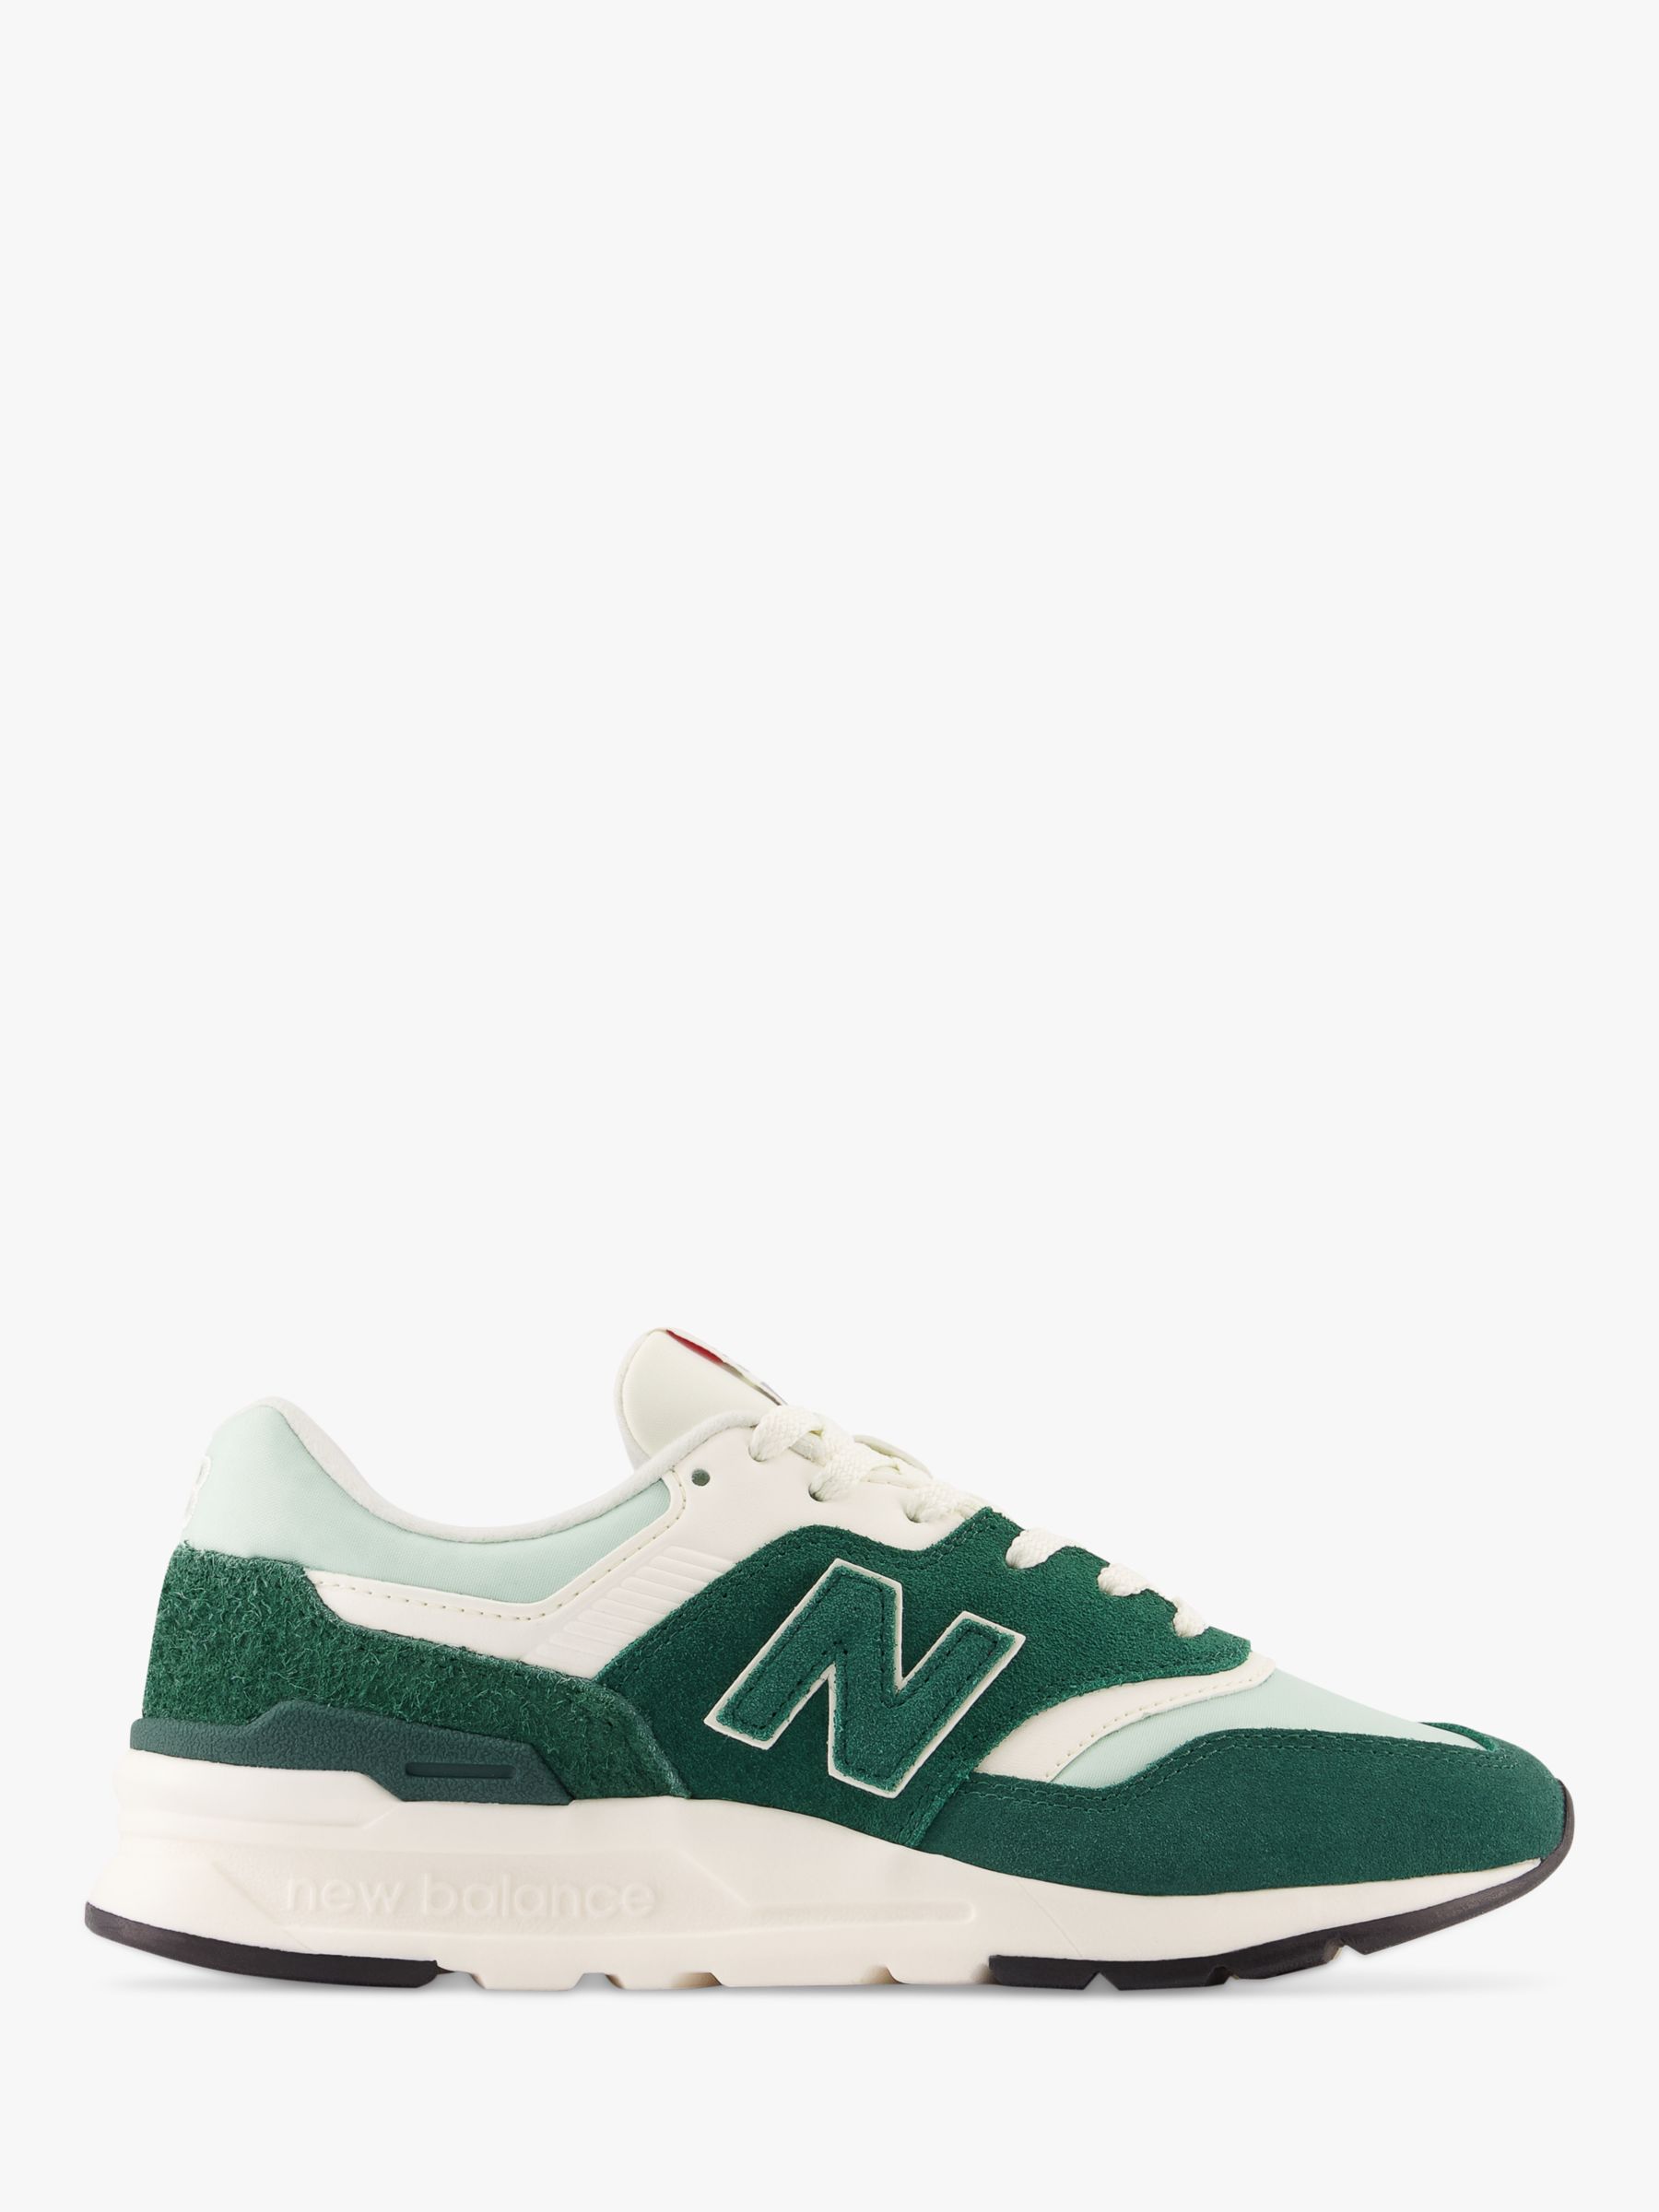 Balance 997H Suede Trainers, Green/Mint